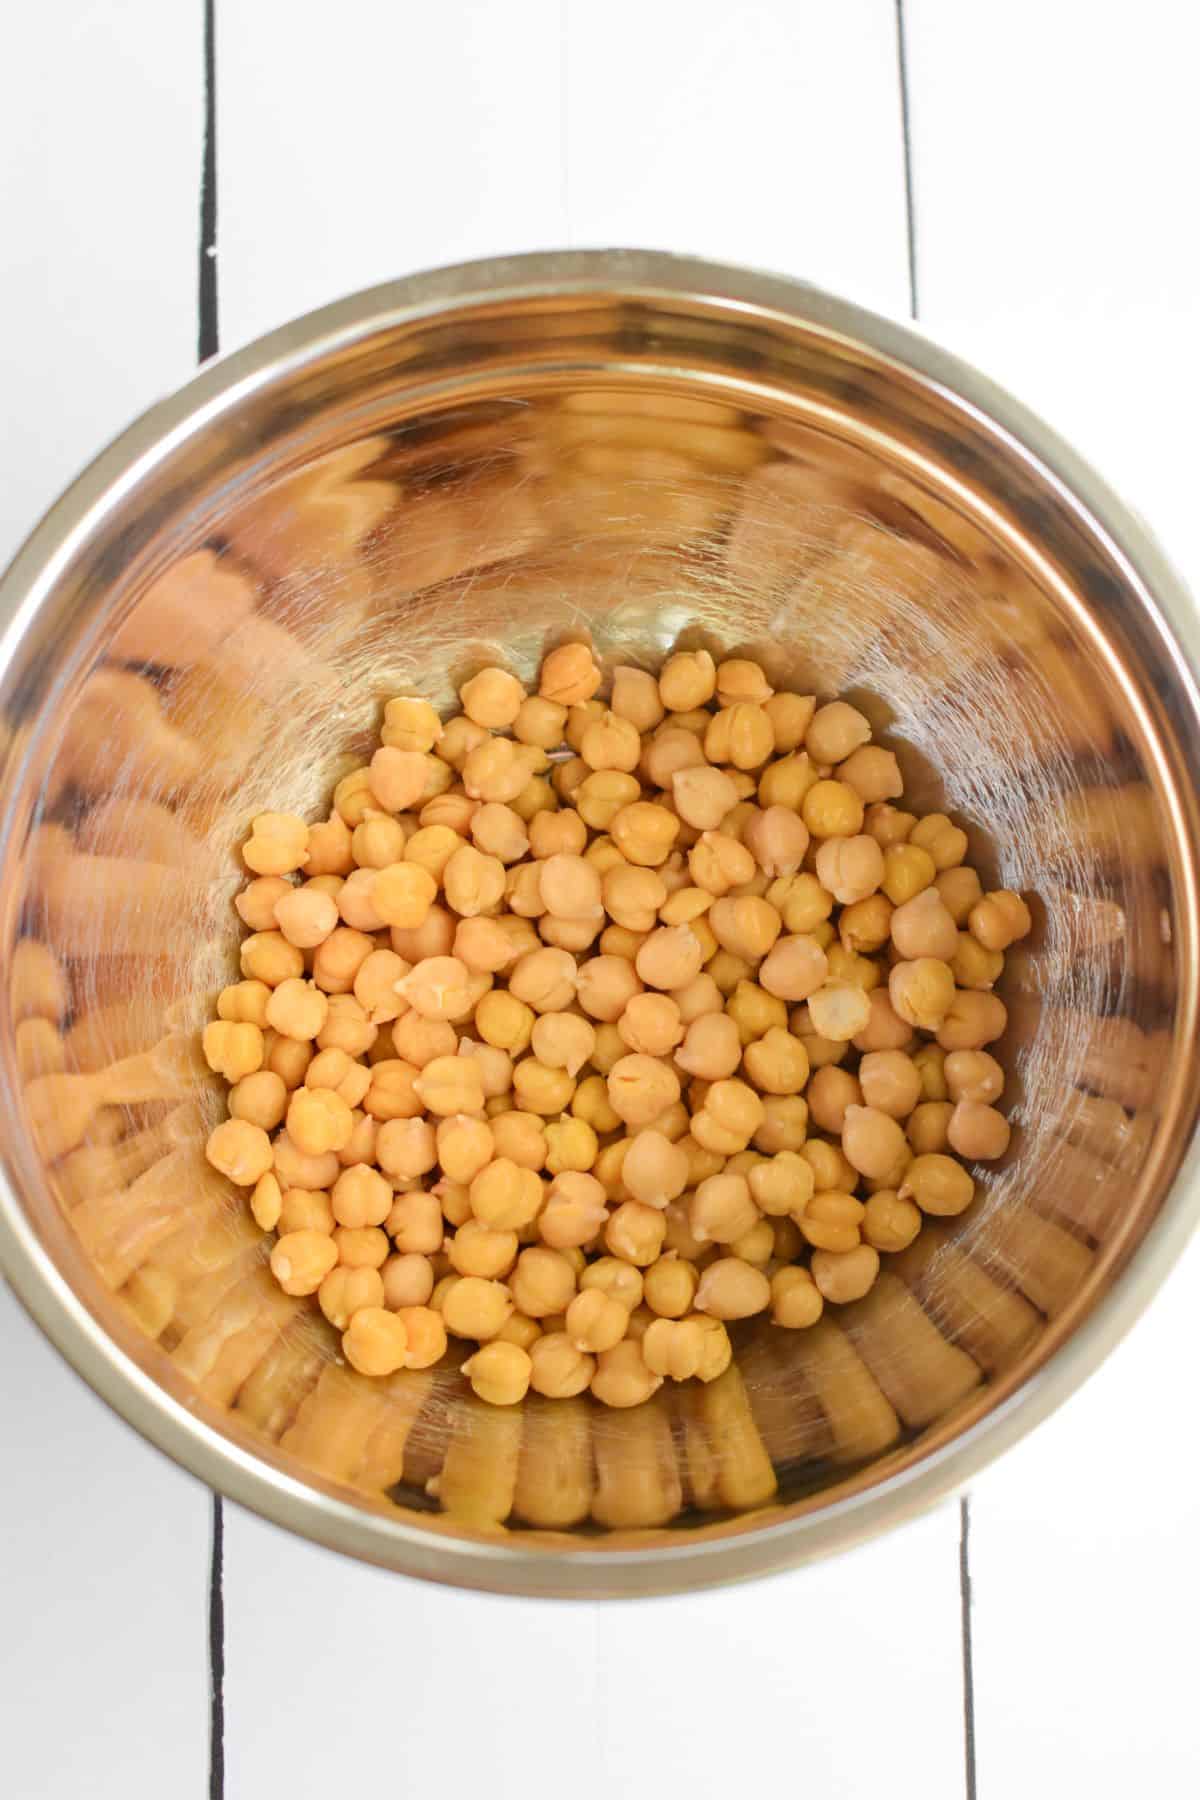 Overhead view of chickpeas in a mixing bowl.